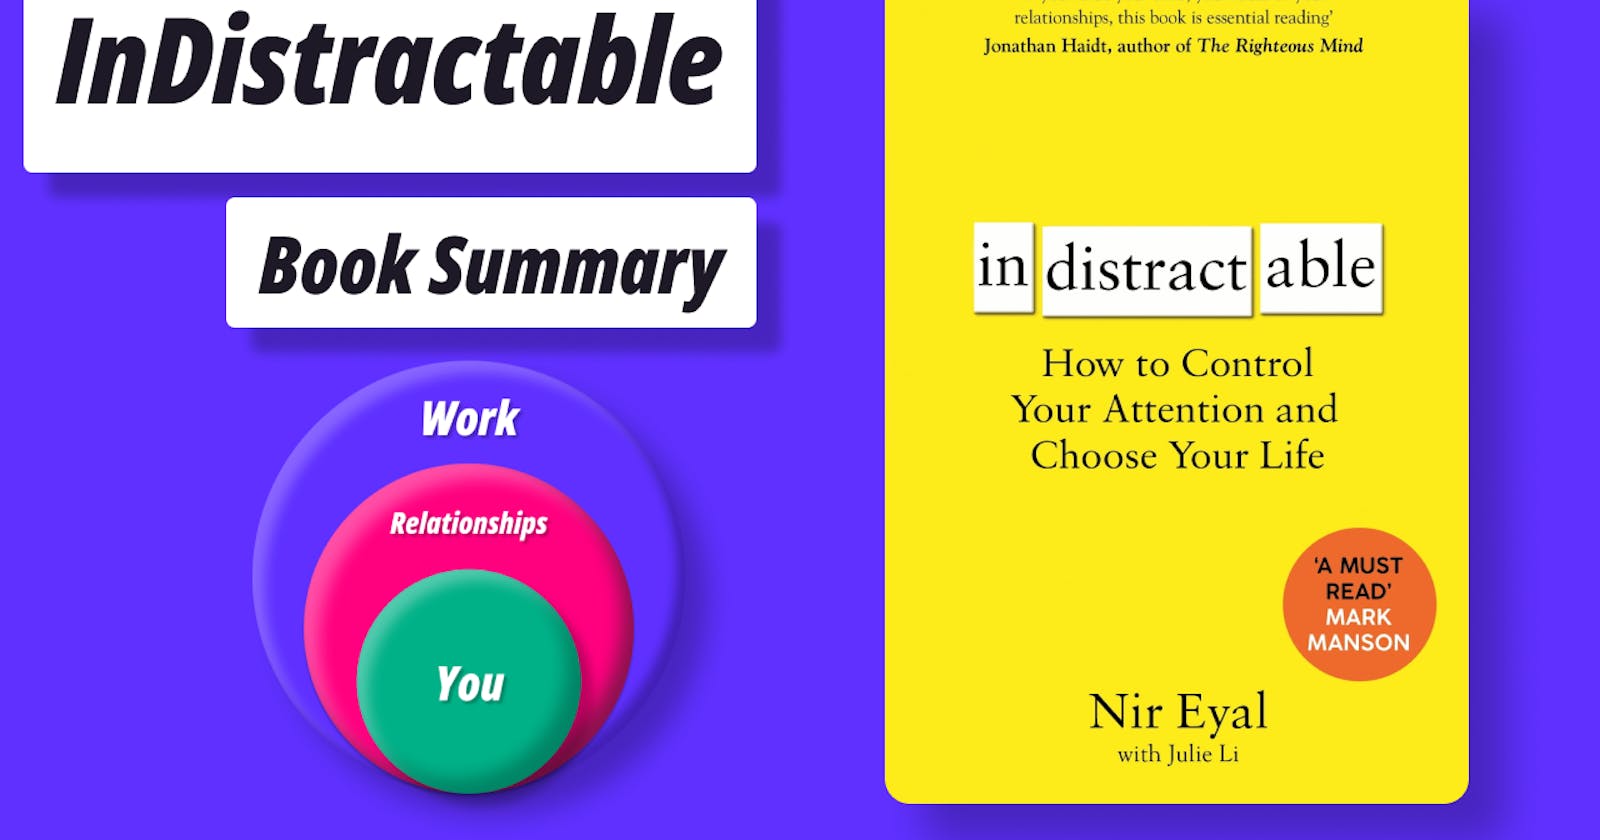 Indistractable: How to Control Your Attention and Choose Your Life - Nir Eyal